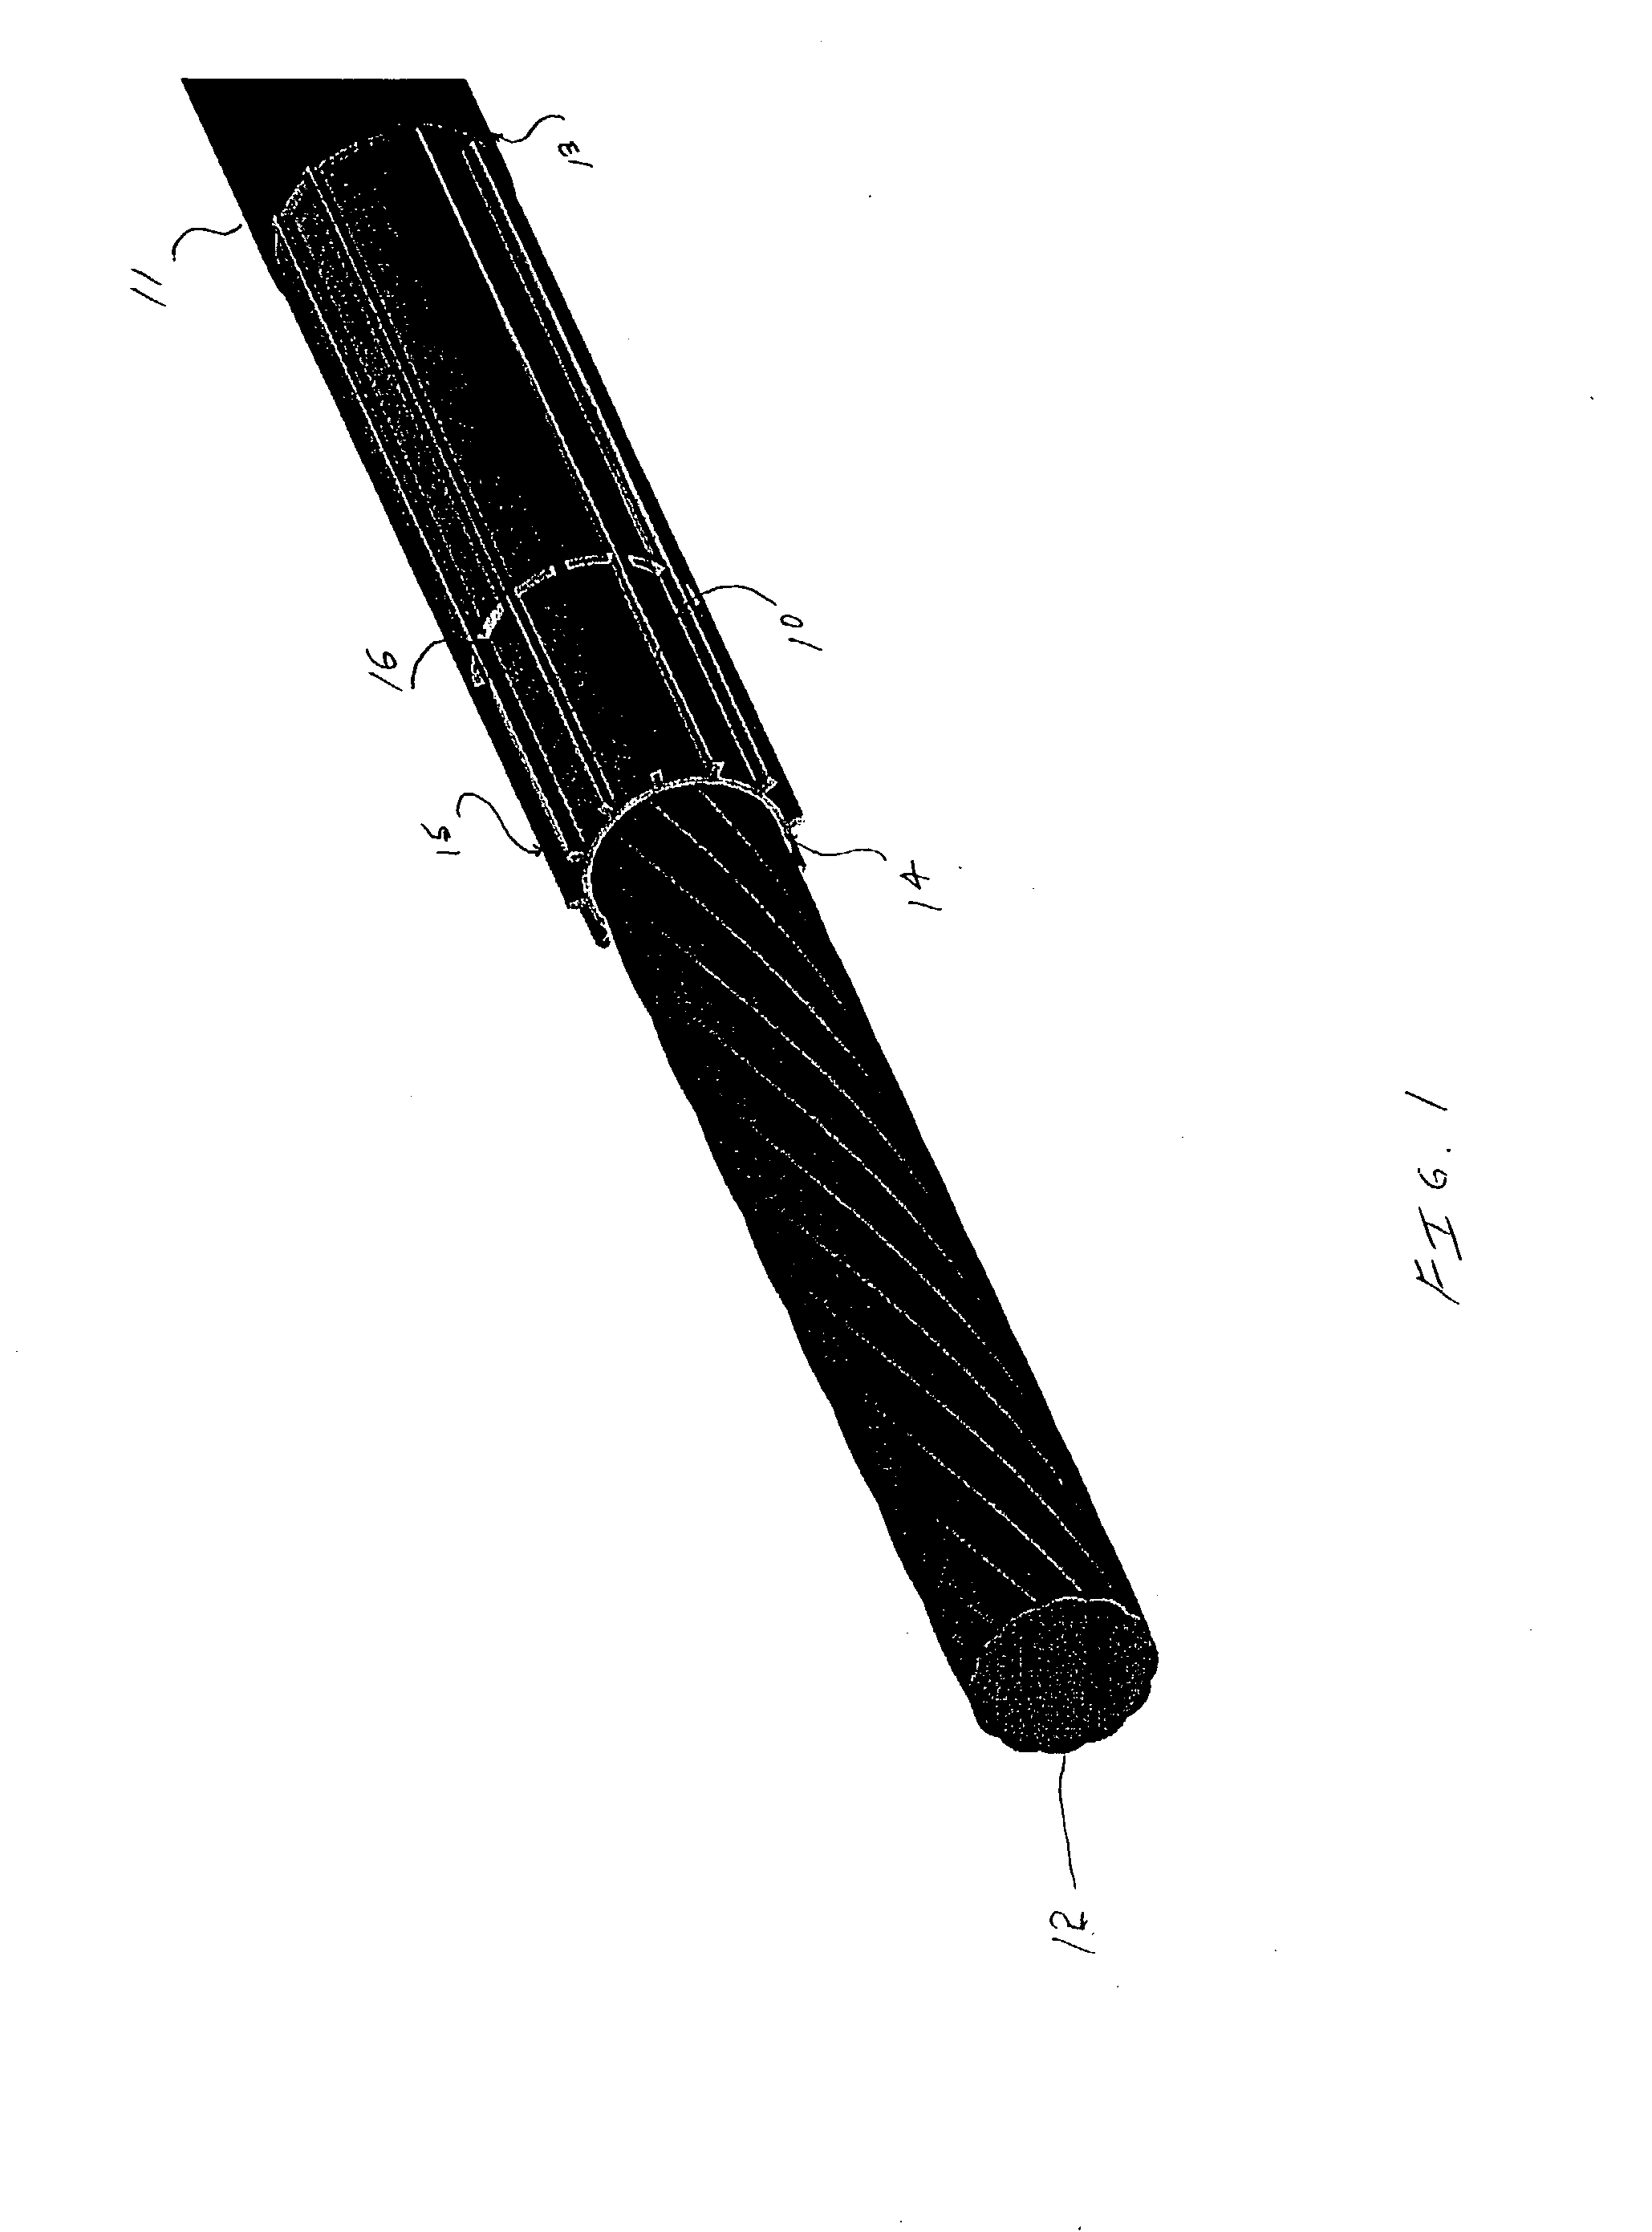 Self-sealing electrical cable having a finned or ribbed structure between protective layers